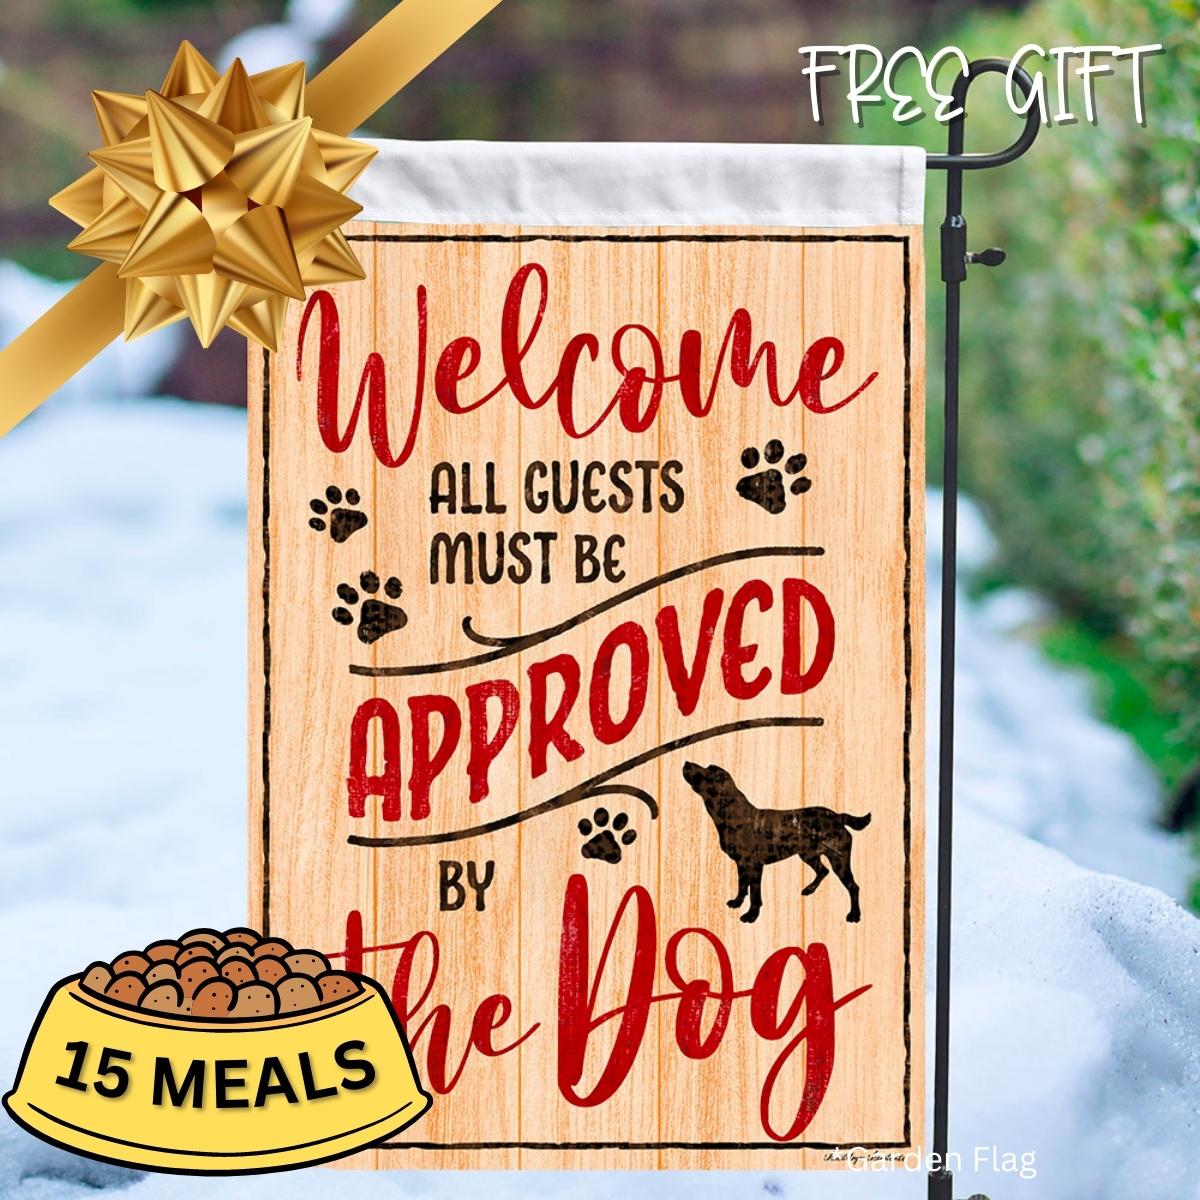 Feed 15 Shelter Dogs for $9.00 and Receive An All Guests Must Be Approved The Dog Garden Flag